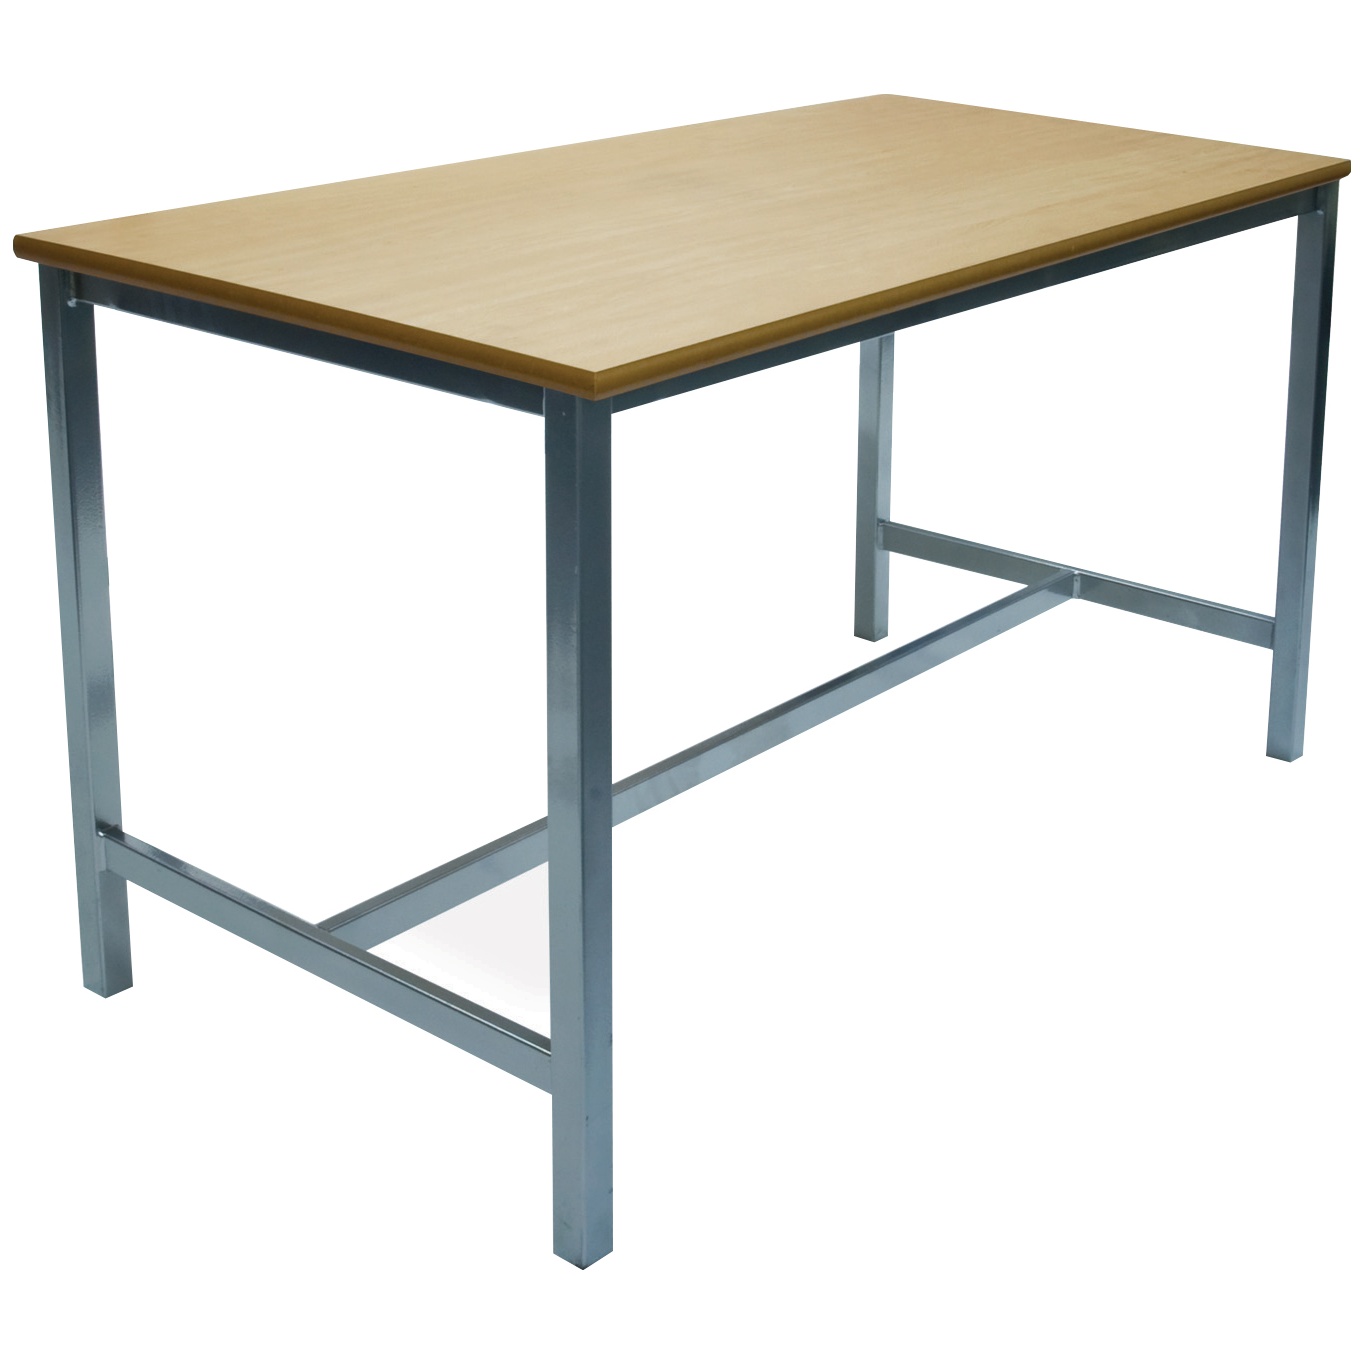 Scholar Heavy Duty H Frame Lab Tables 750mm Deep Free Uk Delivery